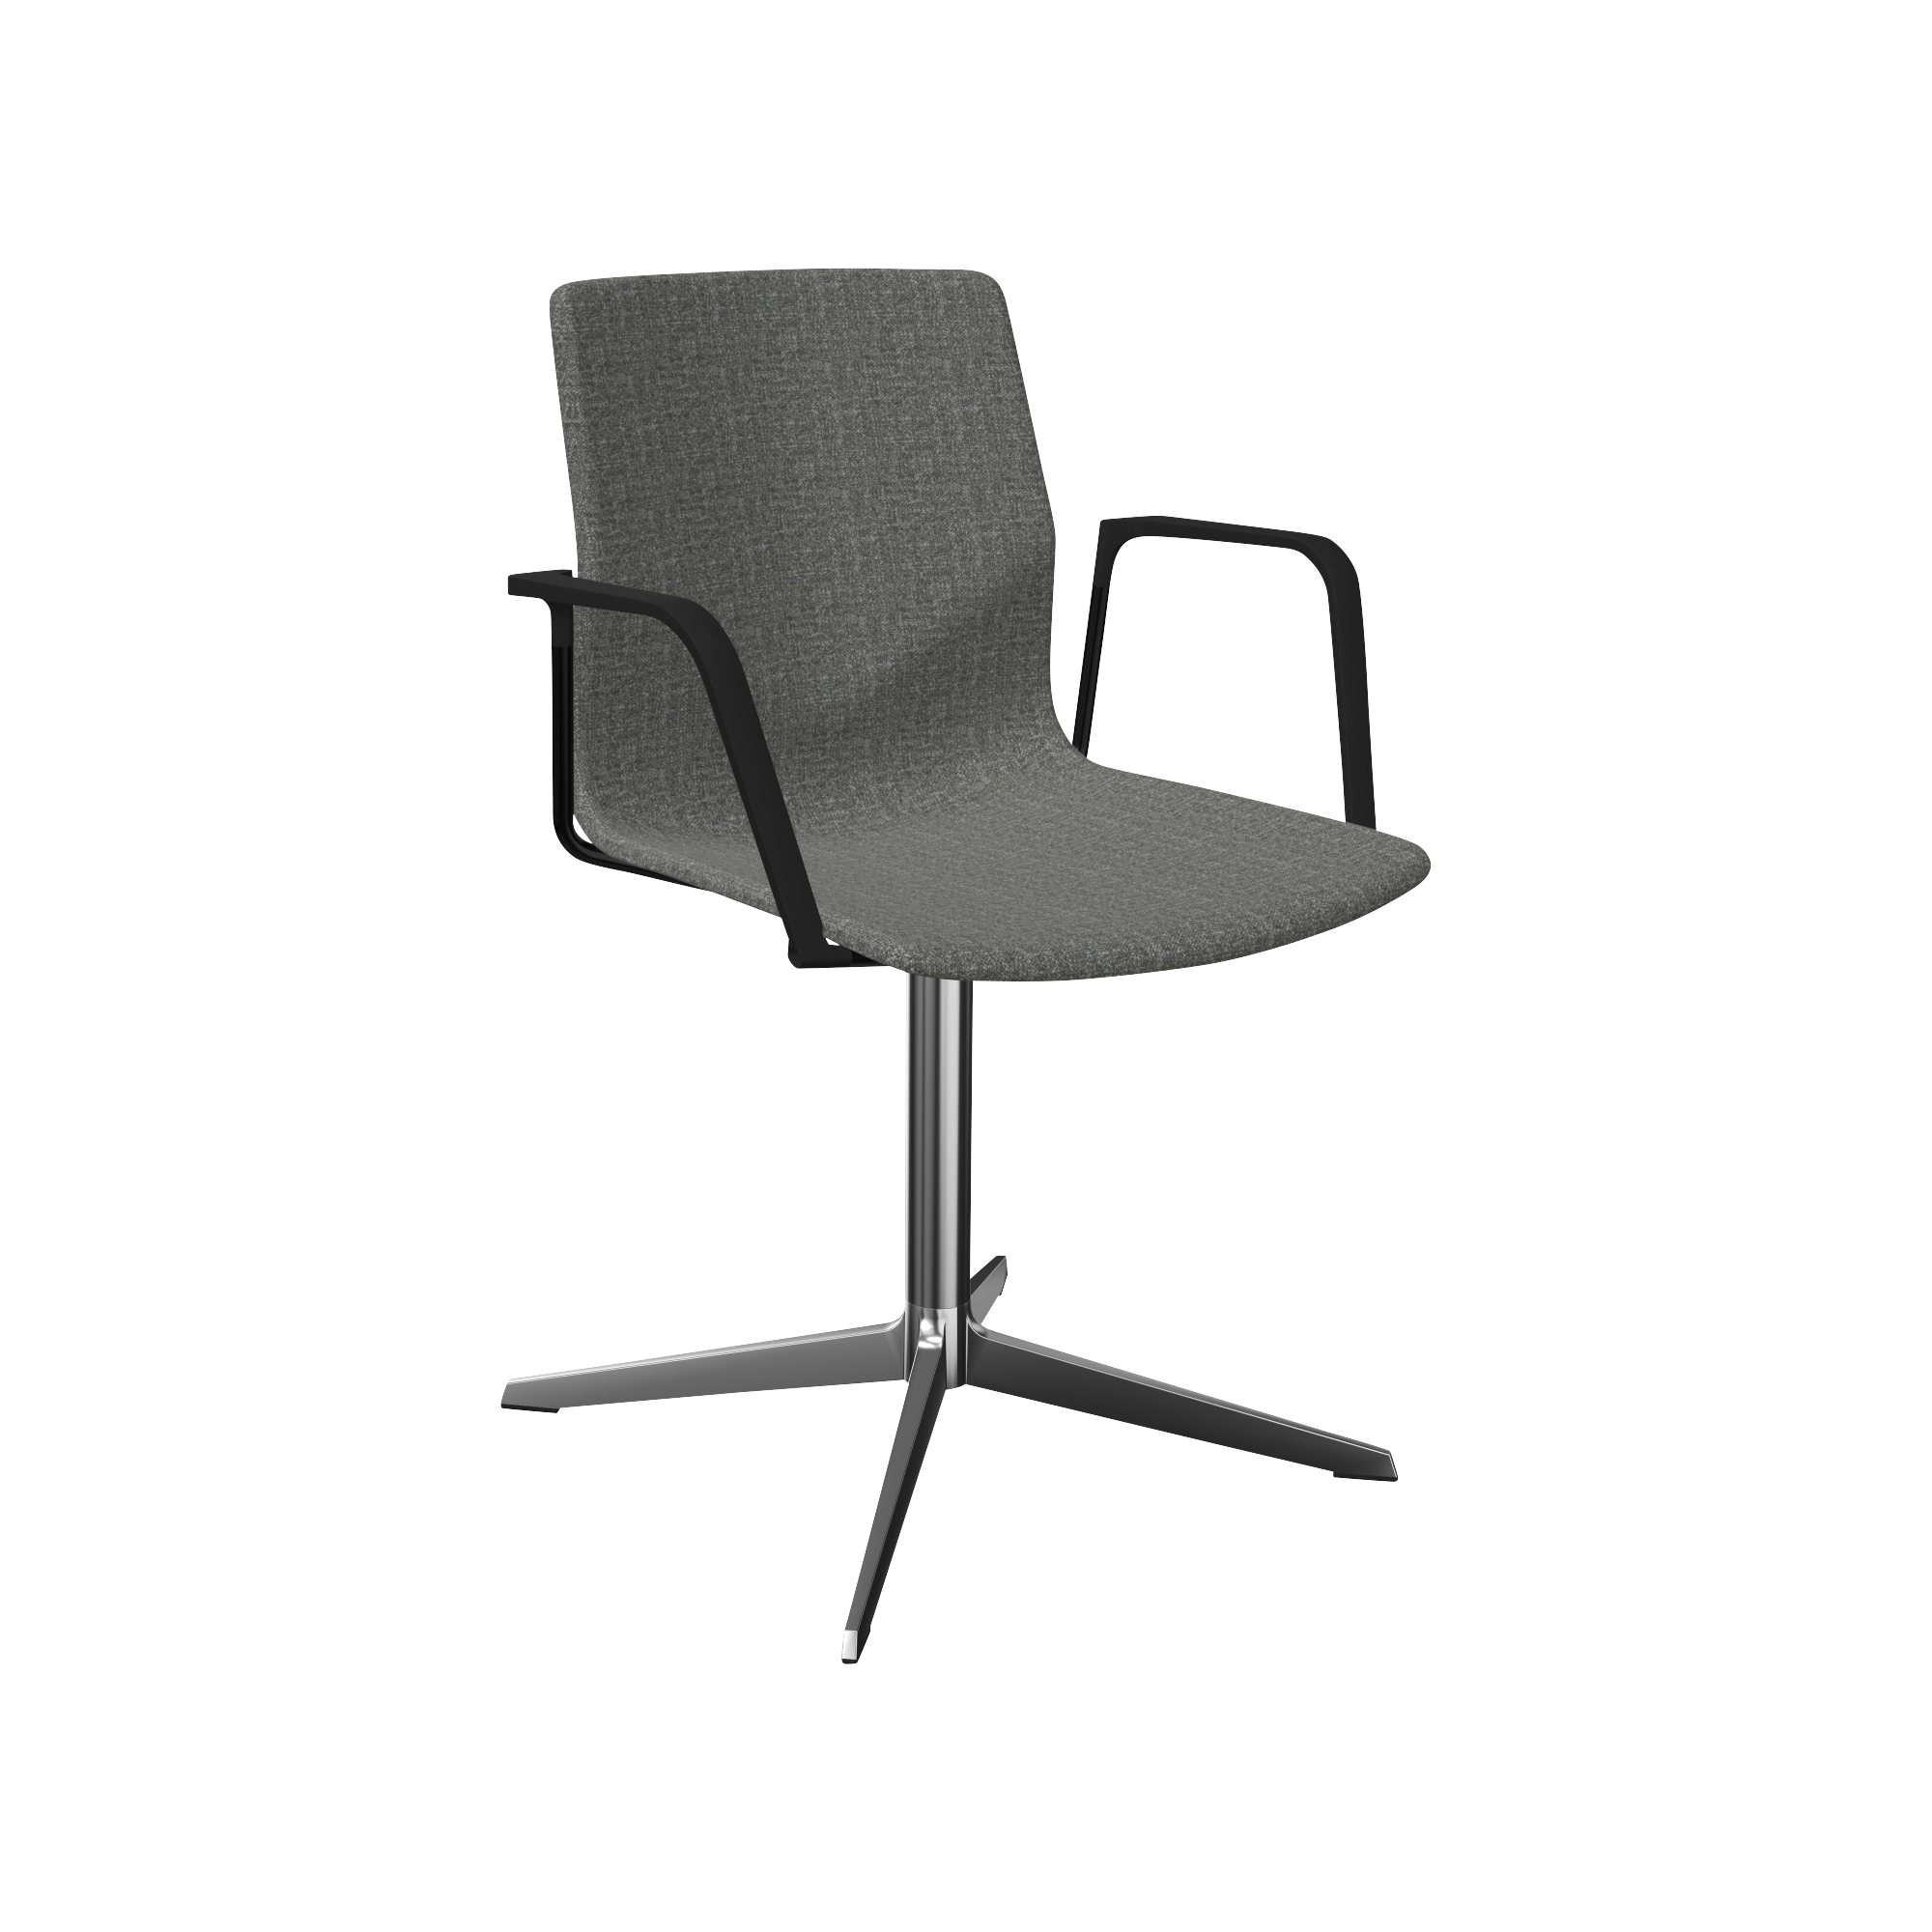 A grey office chair with a chrome pedestal leg and arm rests